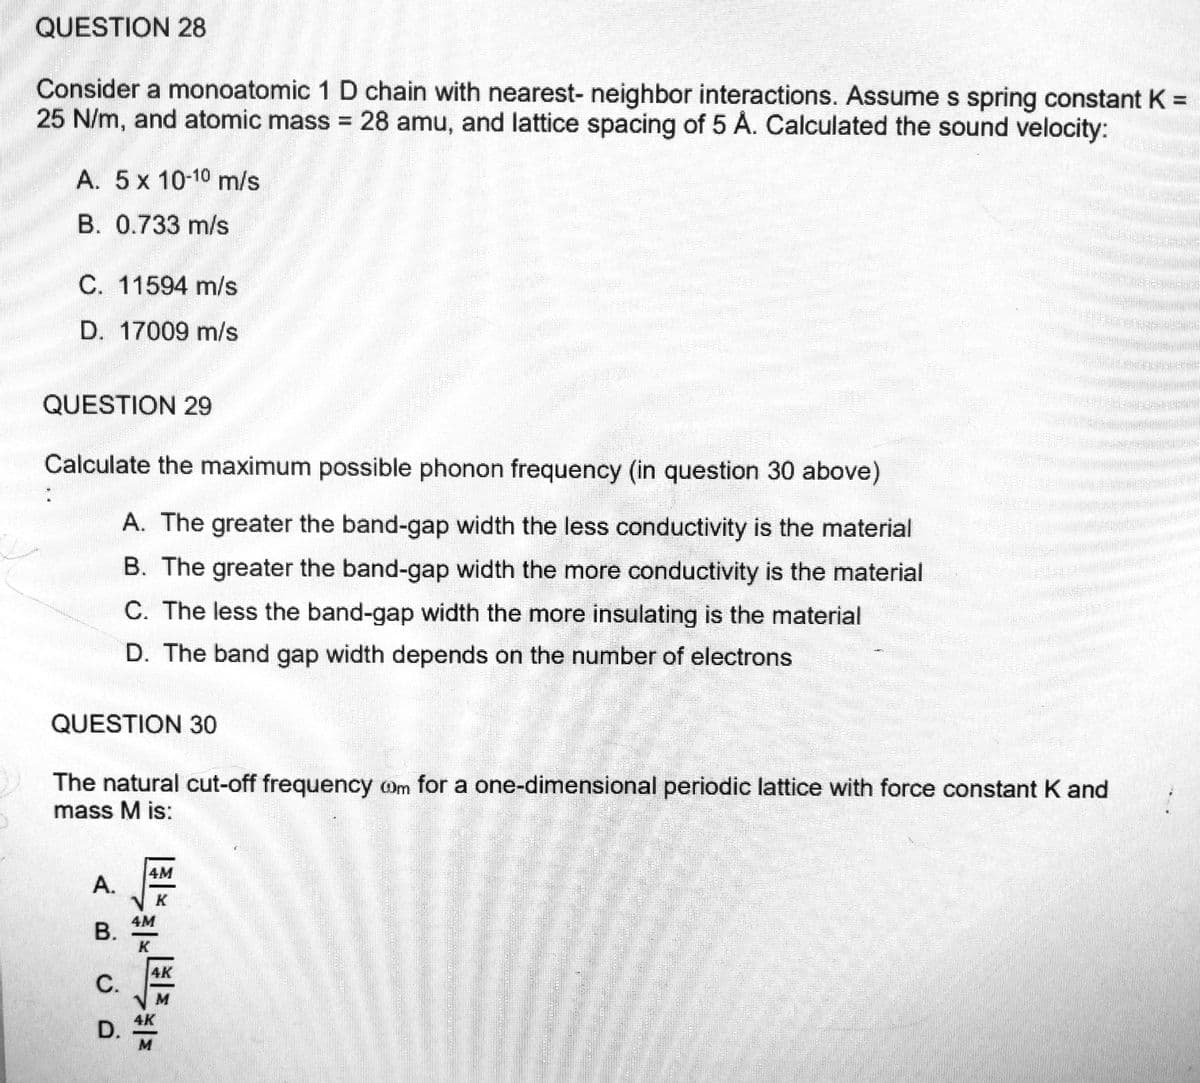 QUESTION 28
Consider a monoatomic 1 D chain with nearest- neighbor interactions. Assume s spring constant K =
1
25 N/m, and atomic mass = 28 amu, and lattice spacing of 5 A. Calculated the sound velocity:
A. 5 x 10-10 m/s
B. 0.733 m/s
C. 11594 m/s
D. 17009 m/s
QUESTION 29
Calculate the maximum possible phonon frequency (in question 30 above)
A. The greater the band-gap width the less conductivity is the material
B. The greater the band-gap width the more conductivity is the material
C. The less the band-gap width the more insulating is the material
D. The band gap width depends on the number of electrons
QUESTION 30
The natural cut-off frequency oom for a one-dimensional periodic lattice with force constant K and
mass M is:
A.
B.
C.
D.
ما را به
Si
*****
4M